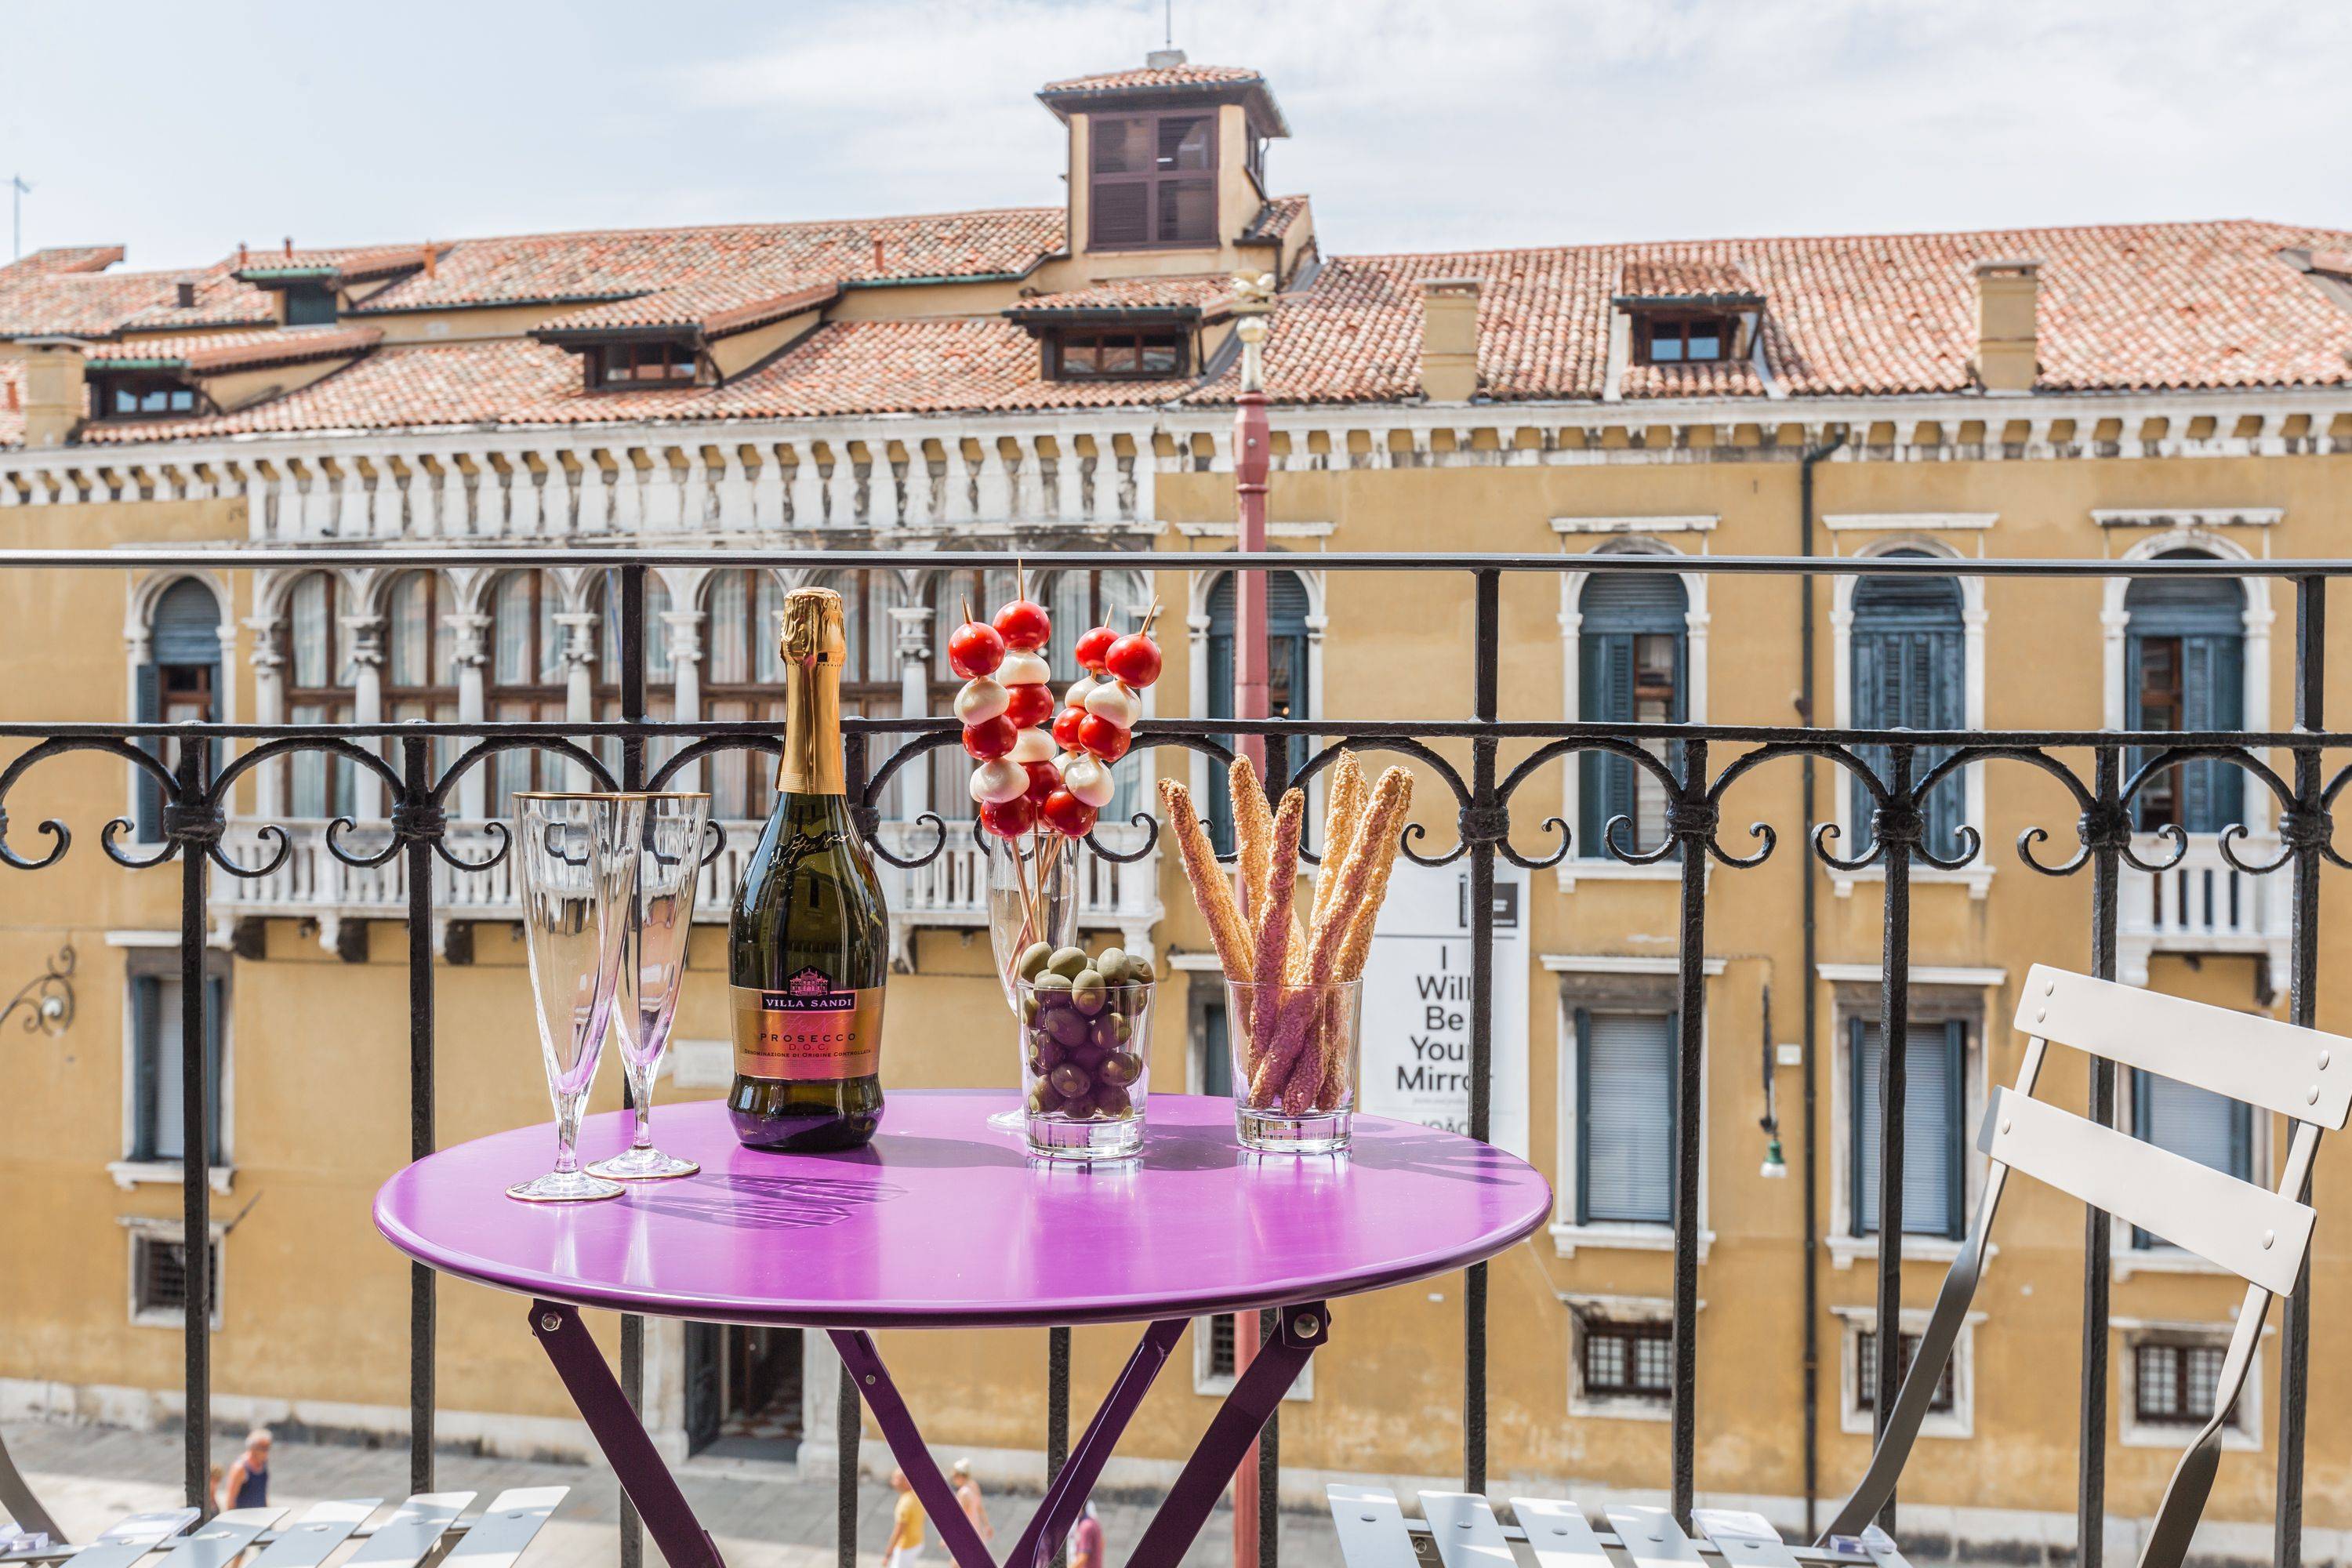 enjoy an aperitive with view at the Manin apartment!